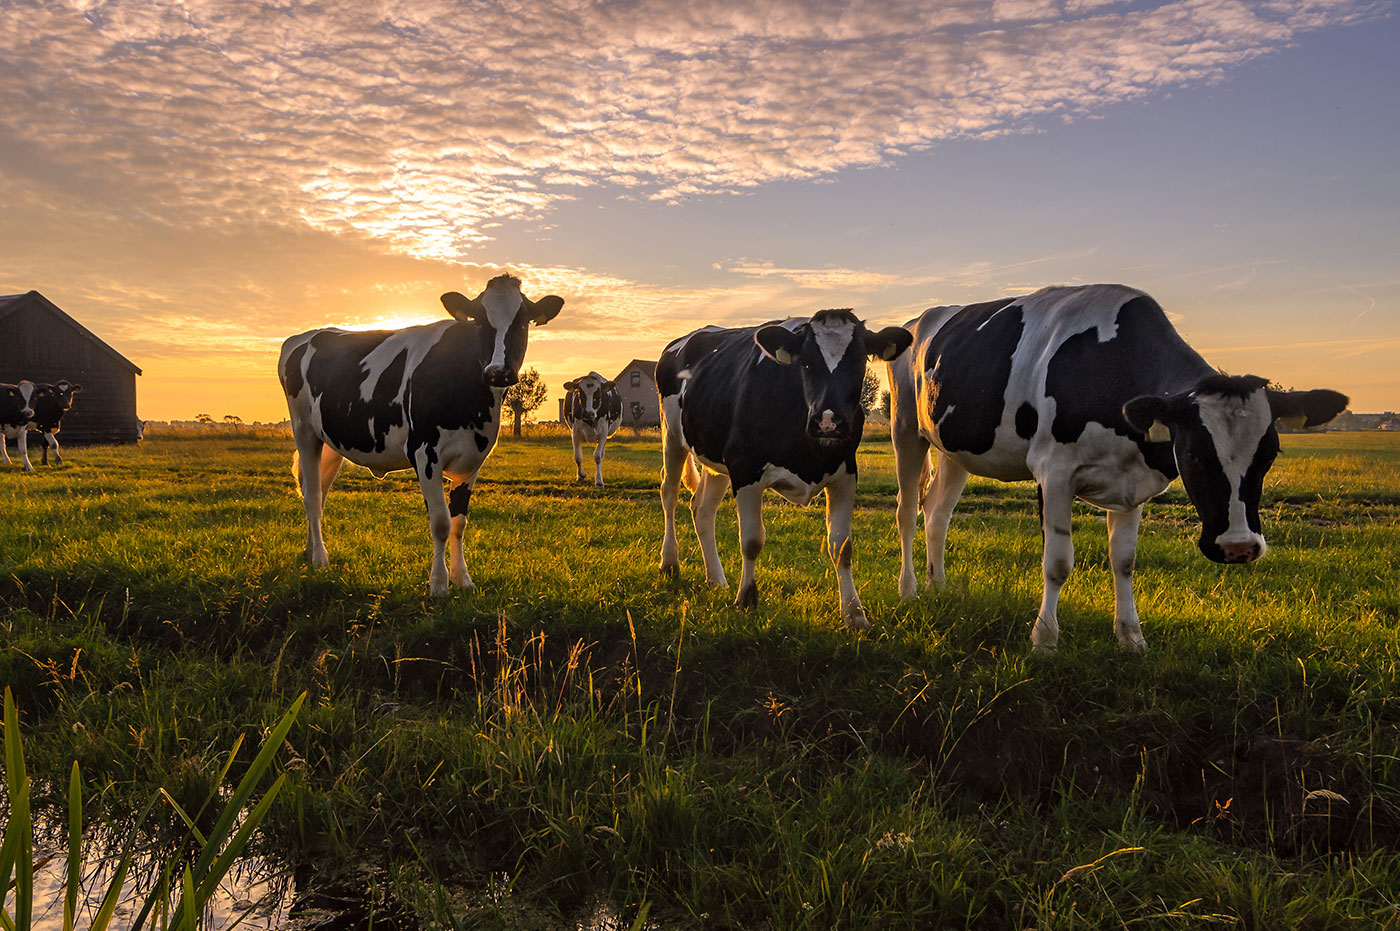 Cows grazing on a field at sunset.